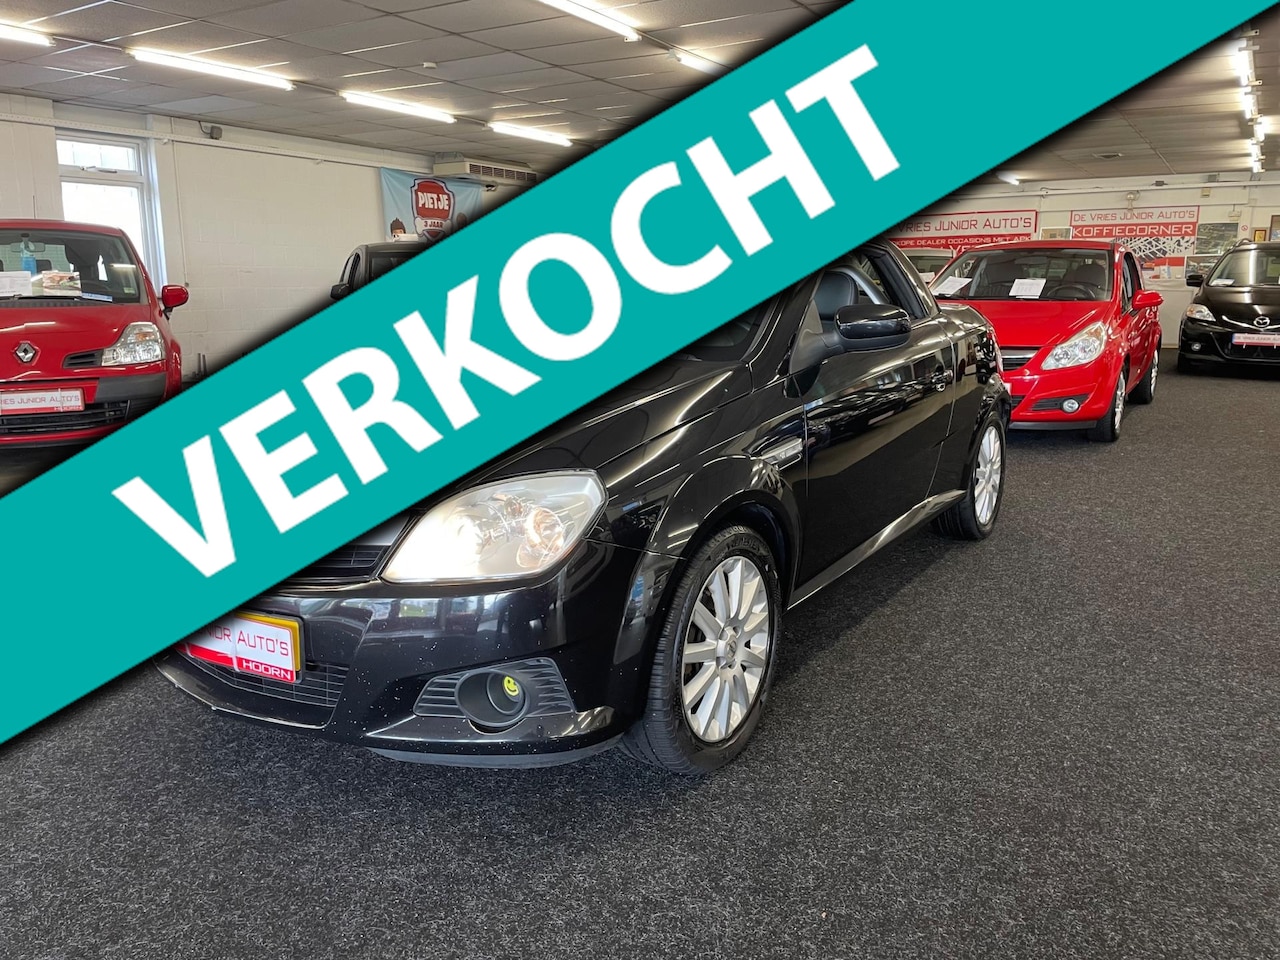 opel tigra black used – Search for your used car on the parking